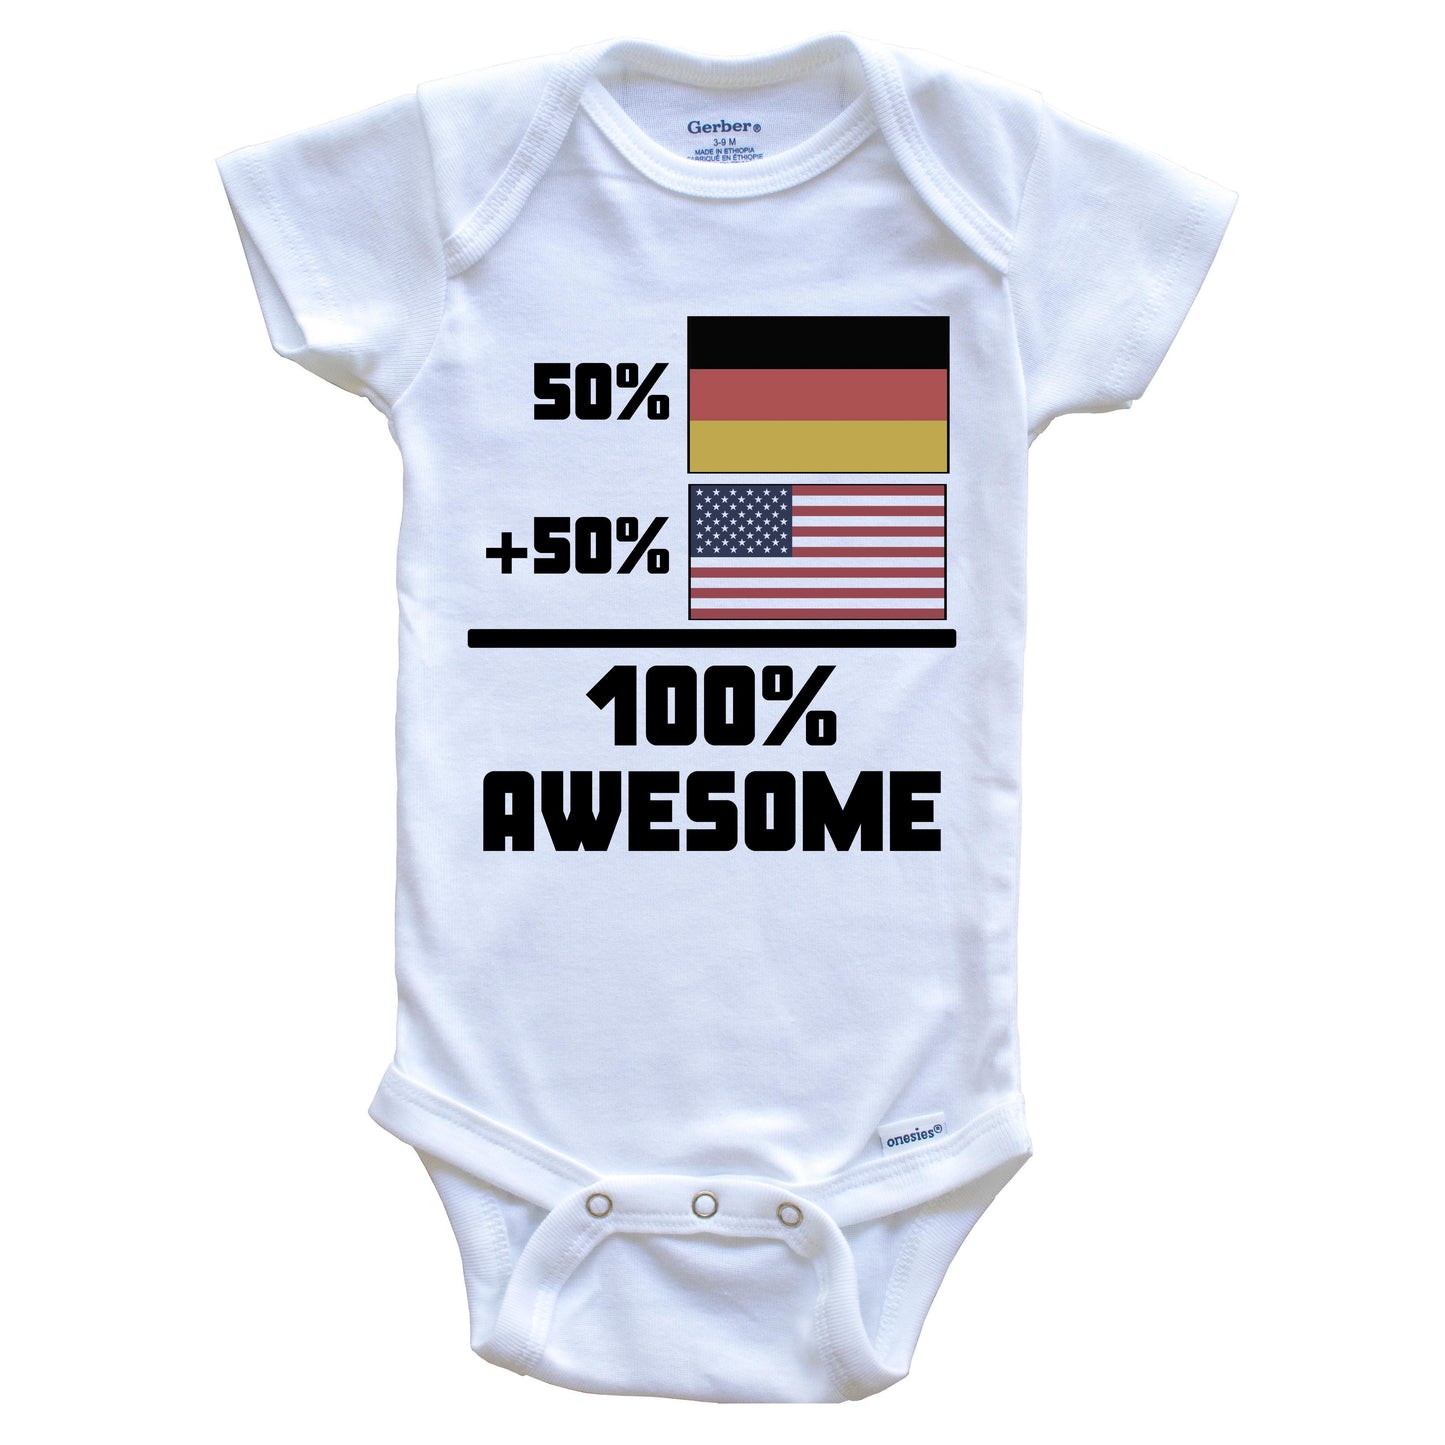 50% German 50% American 100% Awesome Funny Flag Baby Onesie